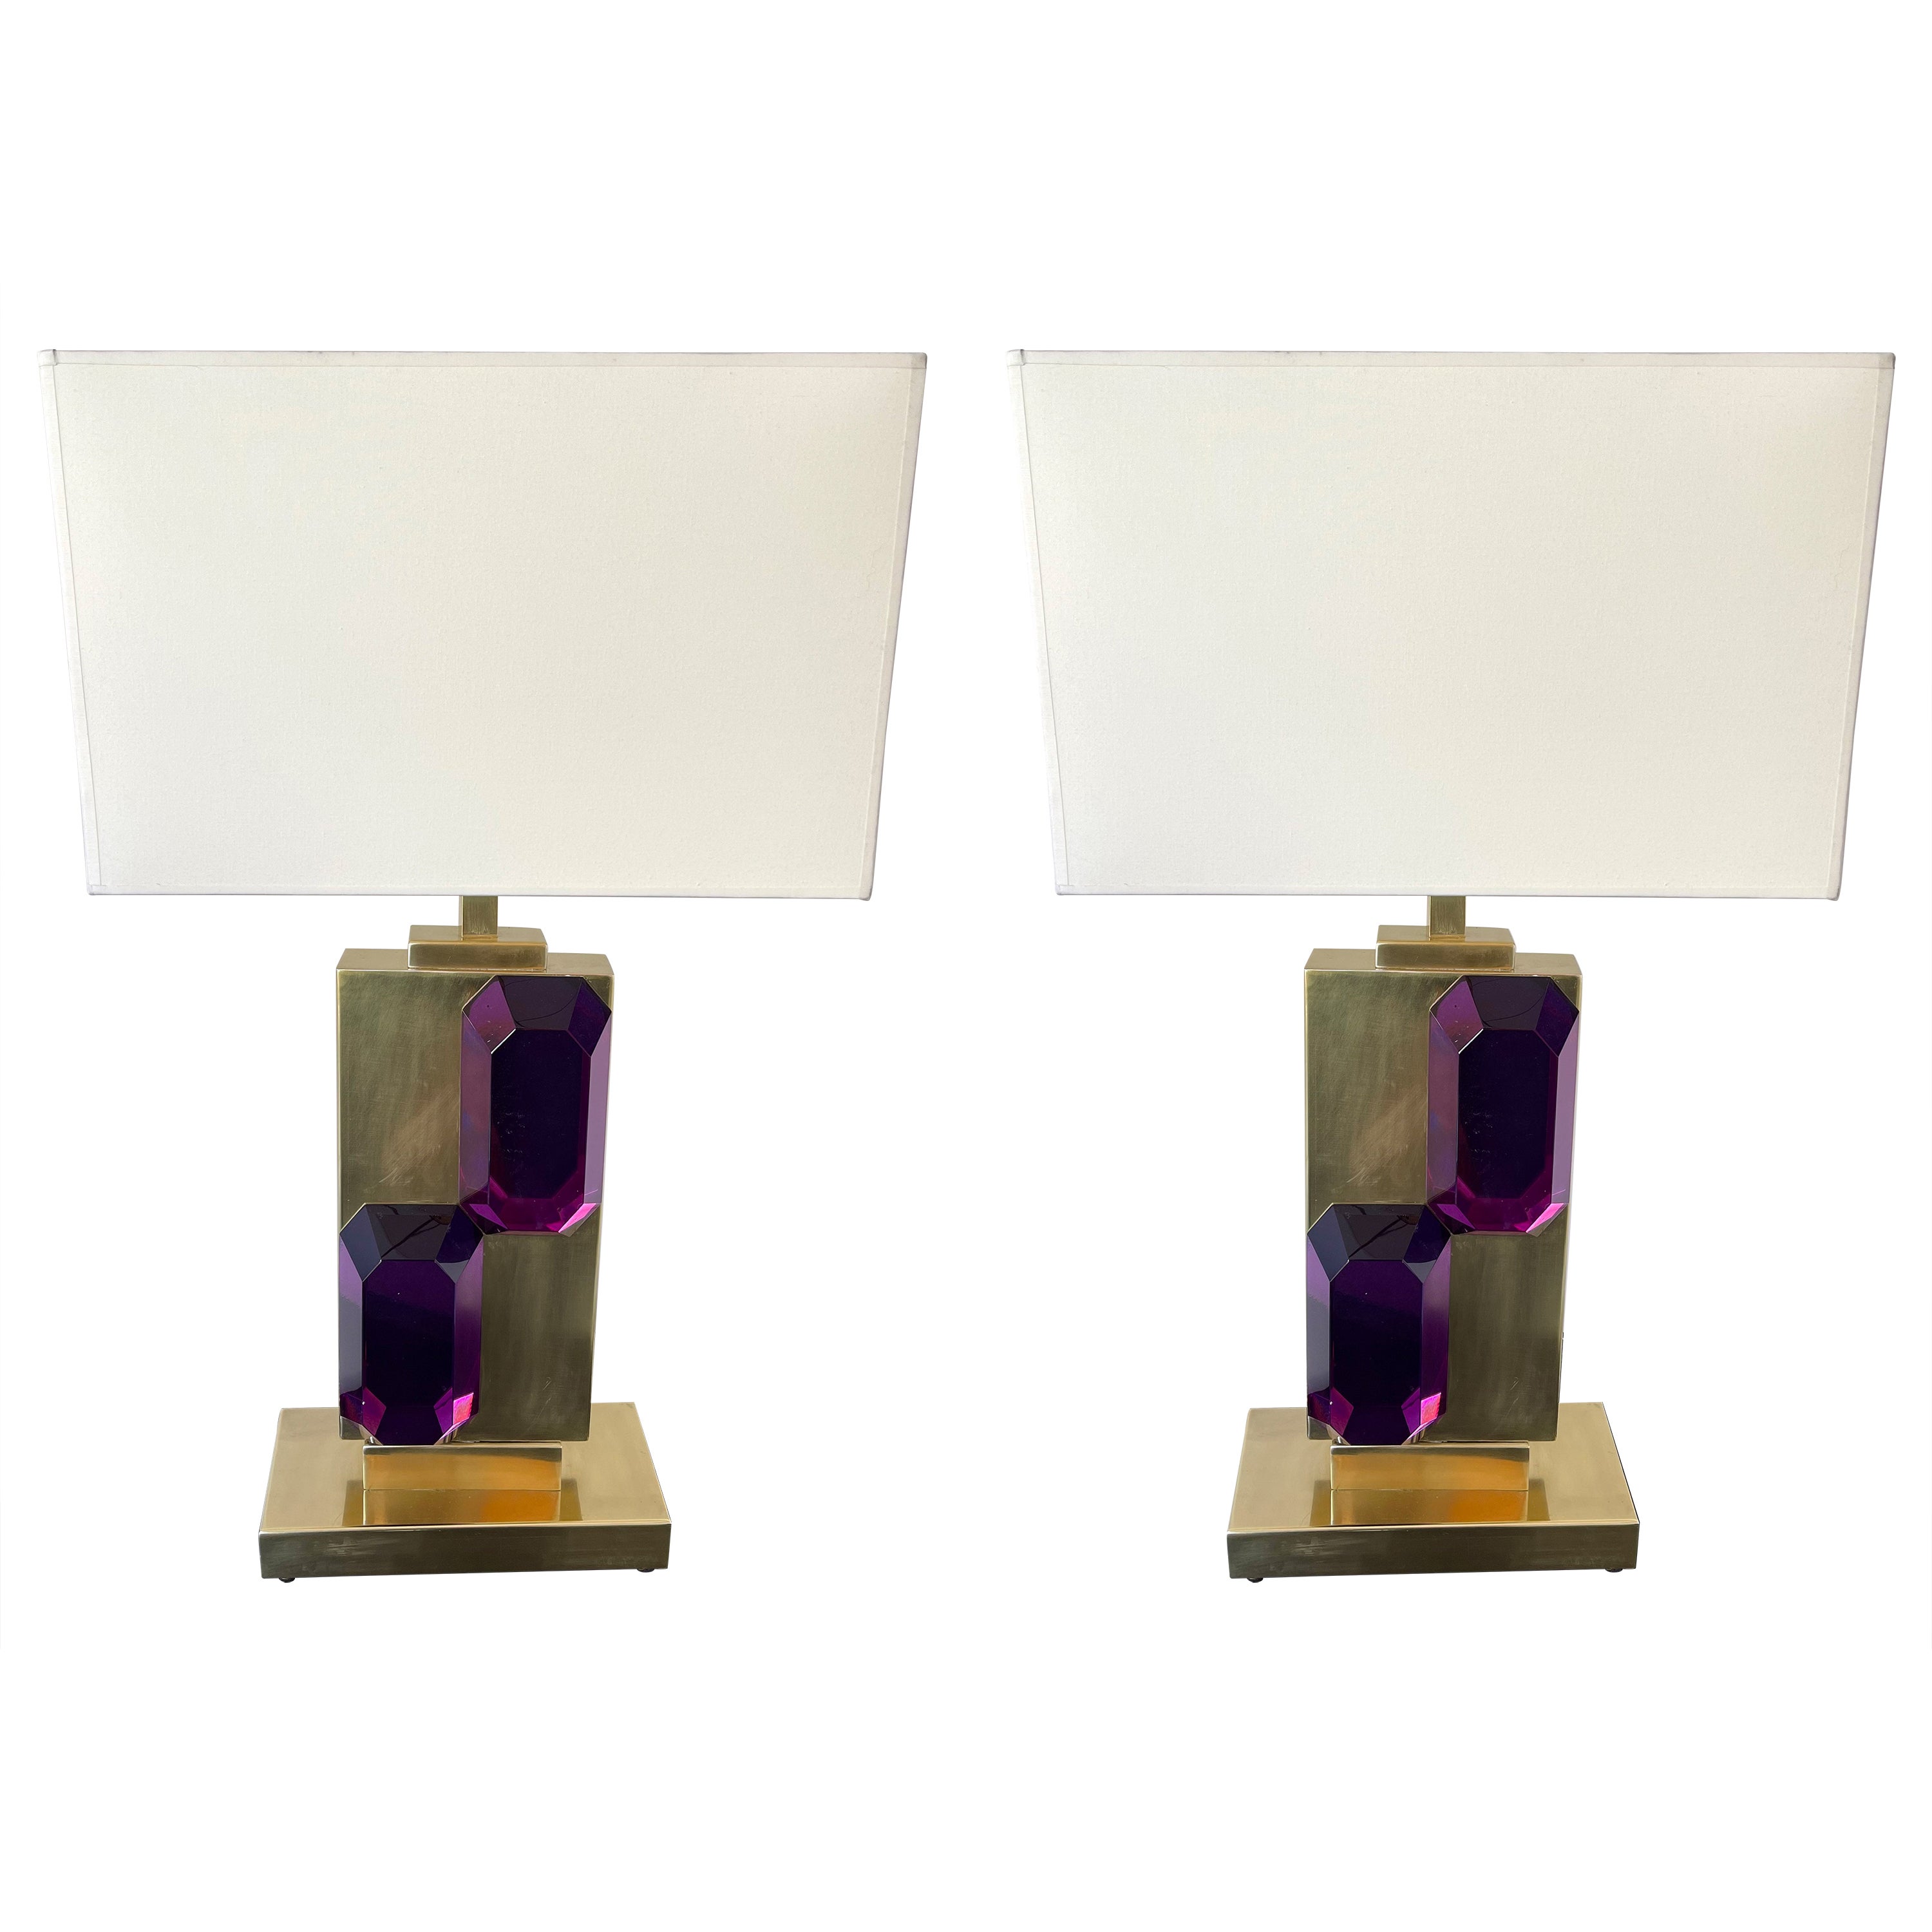 Contemporary Pair of Brass and Amethyst Murano Glass Bar Lamps, Italy